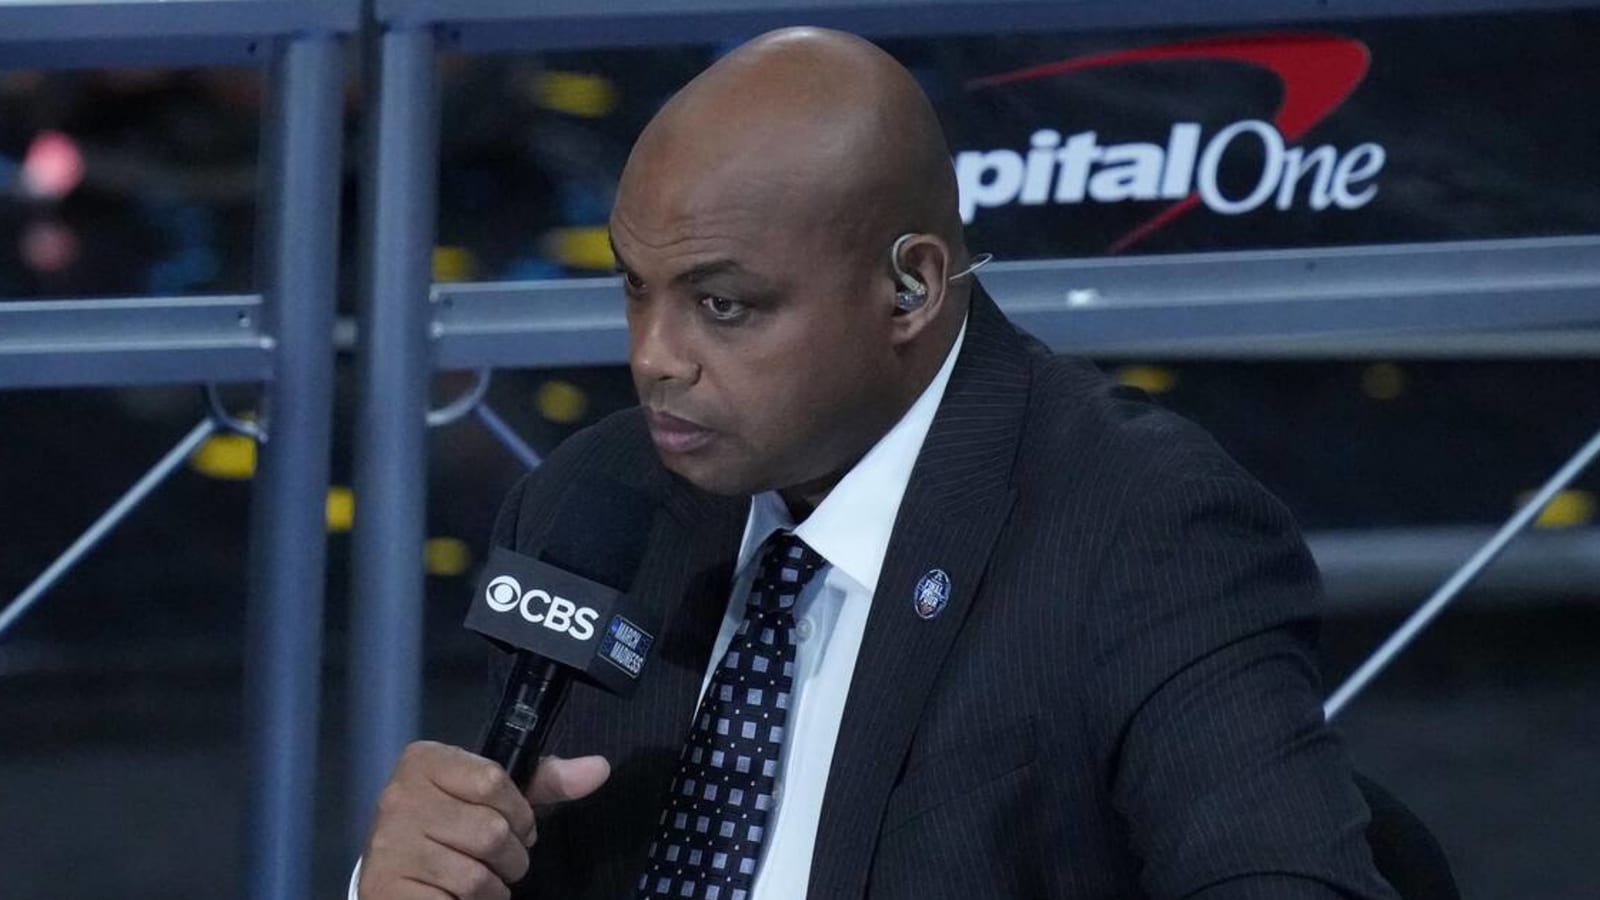 Charles Barkley trolled UNC alum Kenny Smith during NCAA title game